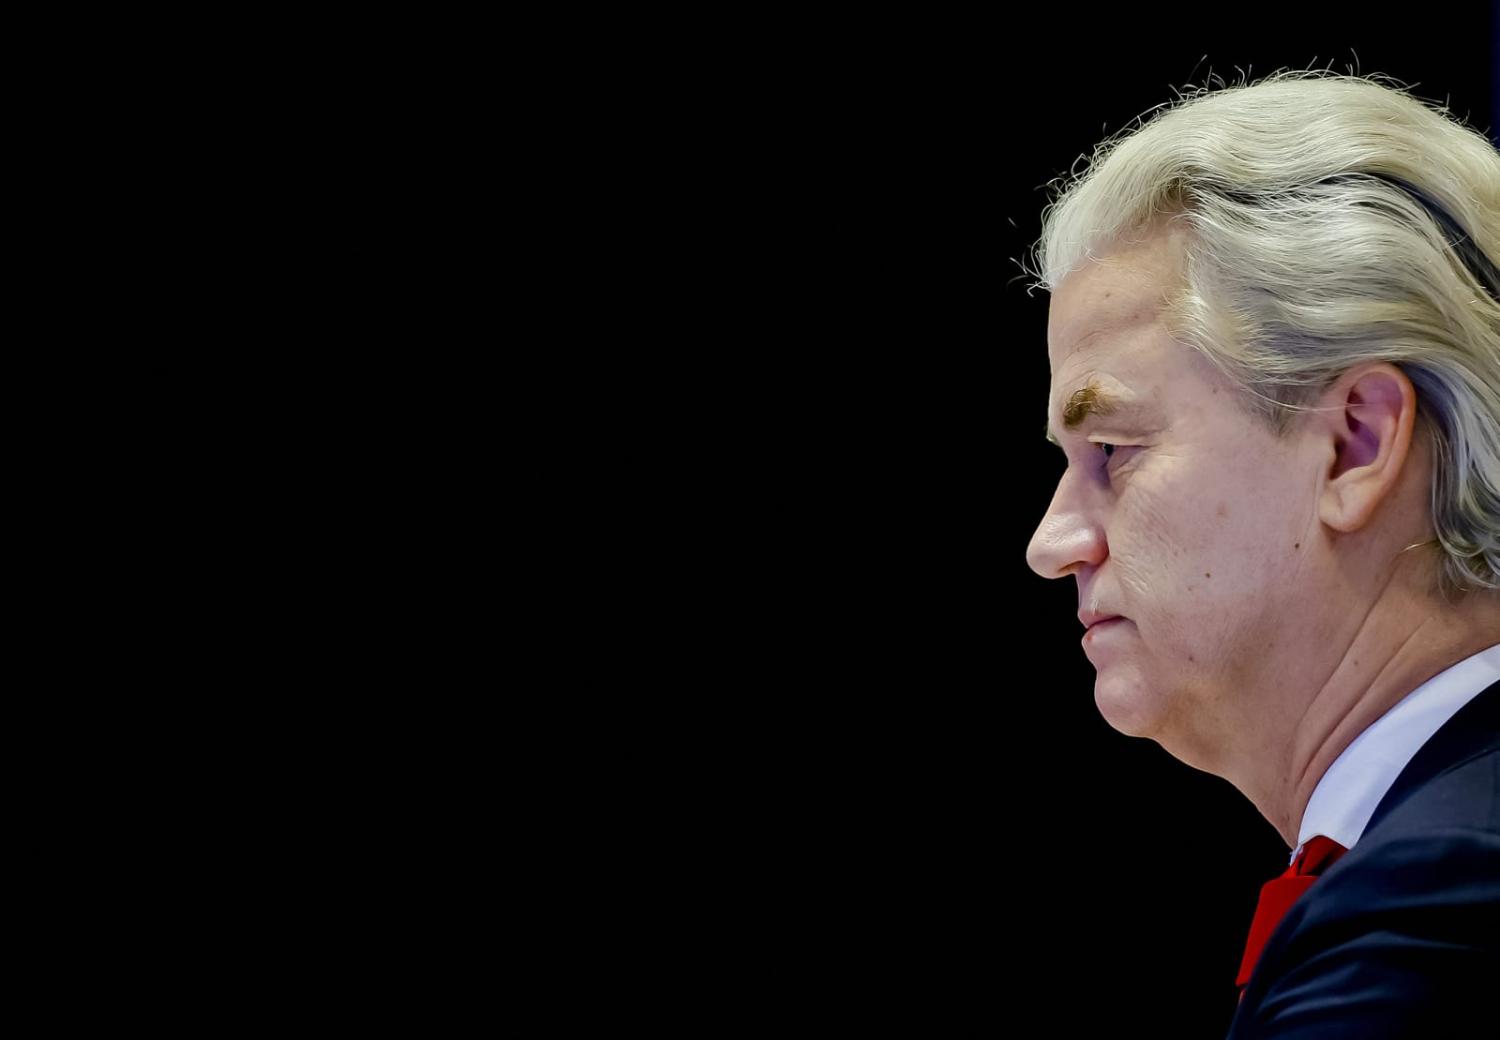 It is often observed that centre-right attempts to imitate the extremes only tend to boost the latter and harm the former - did that help Geert Wilders? (Remko de Waal via AFP/Getty Images)